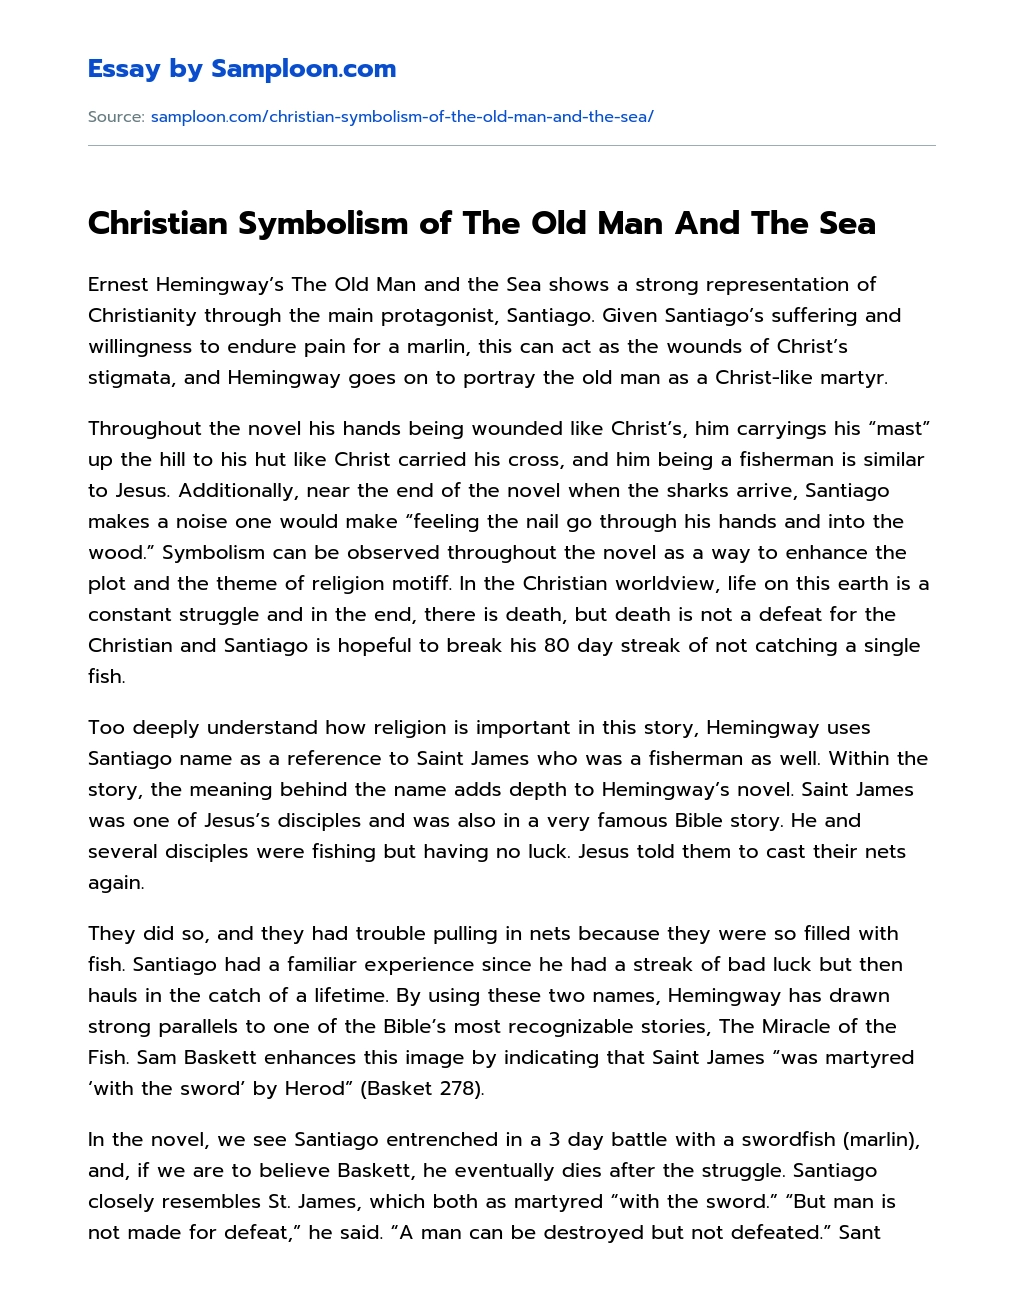 Christian Symbolism of The Old Man And The Sea essay